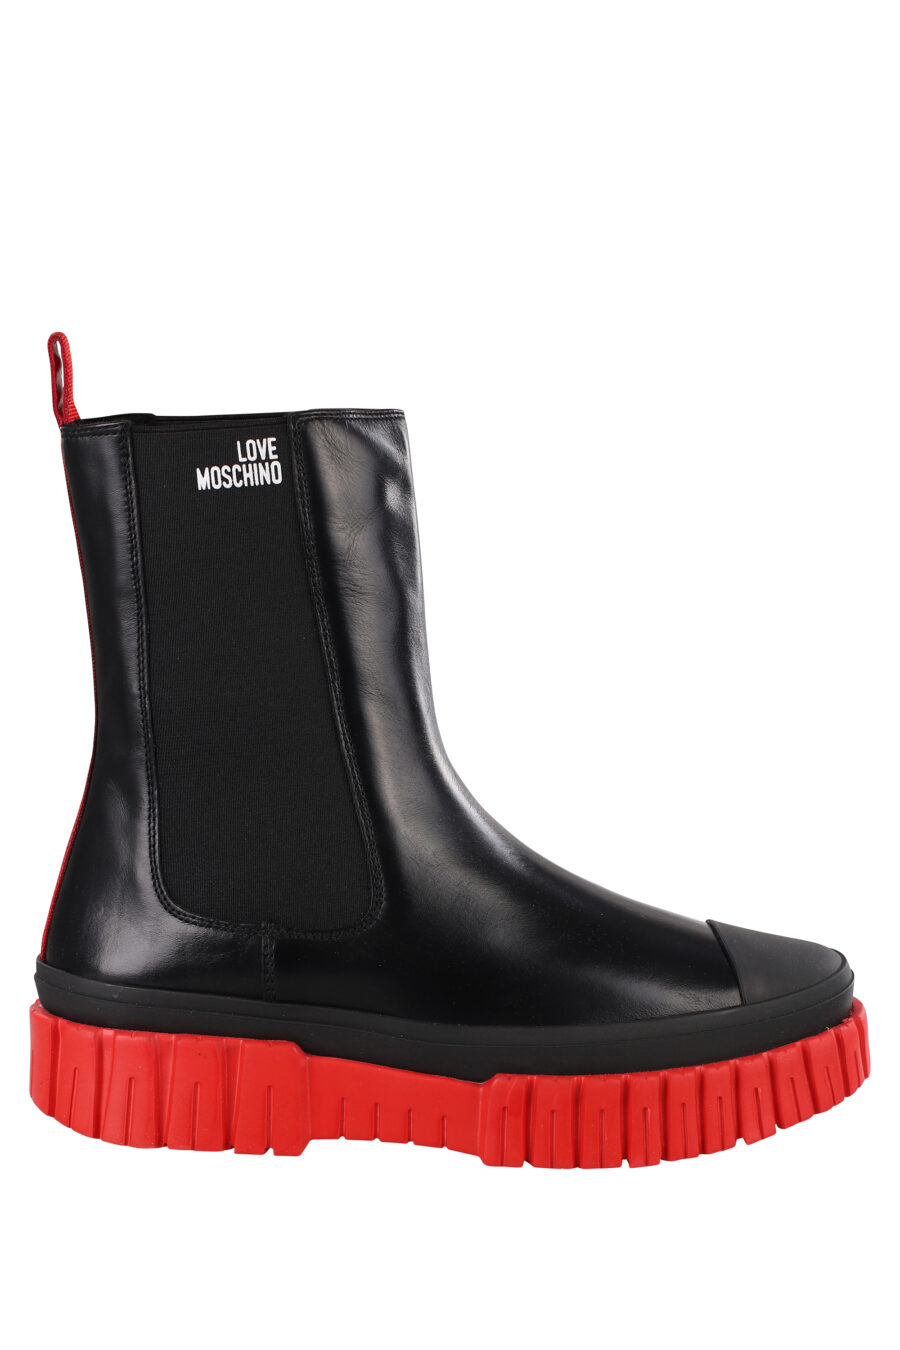 Black ankle boots with red sole and white mini-logo - IMG 1188